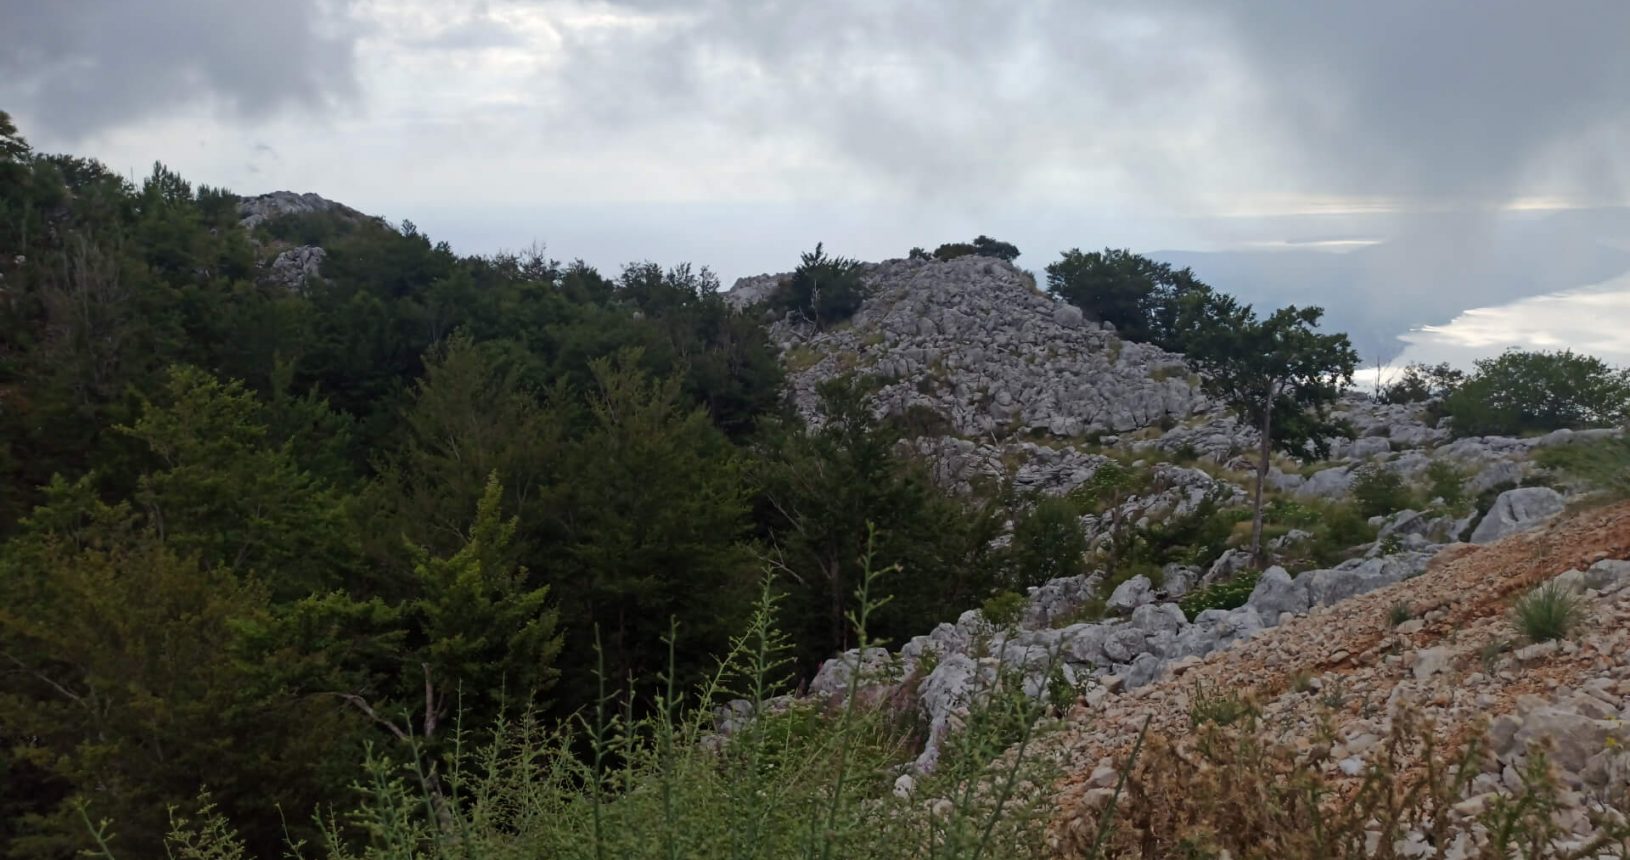 Forest next to the View point for Kotor and Tivat Bay